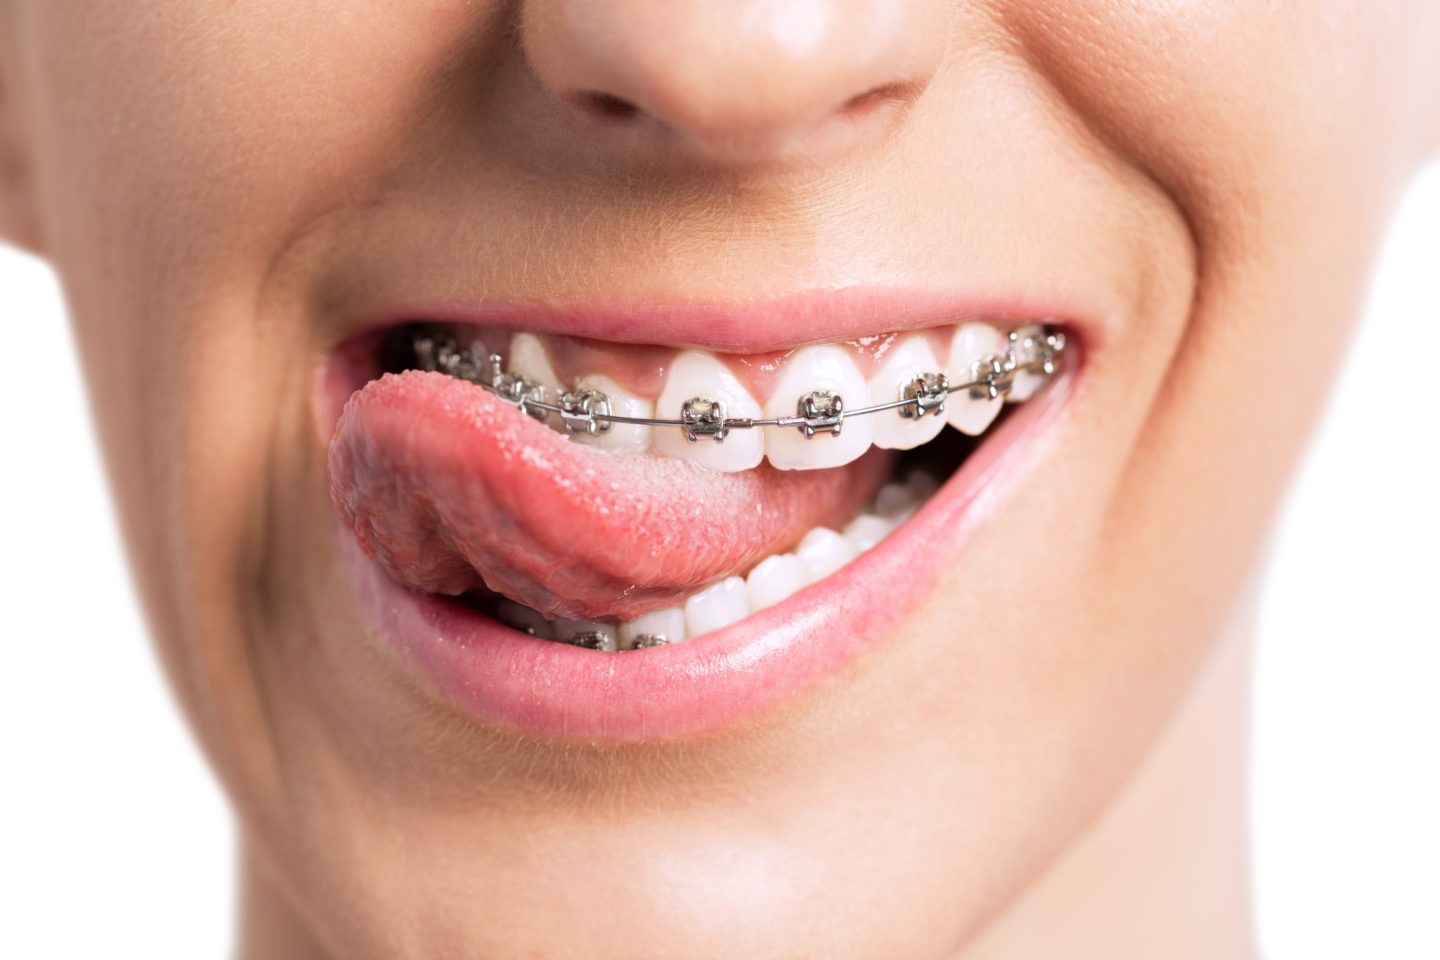 What Are Self-Ligating Braces? Why They’ve Become a Popular Option